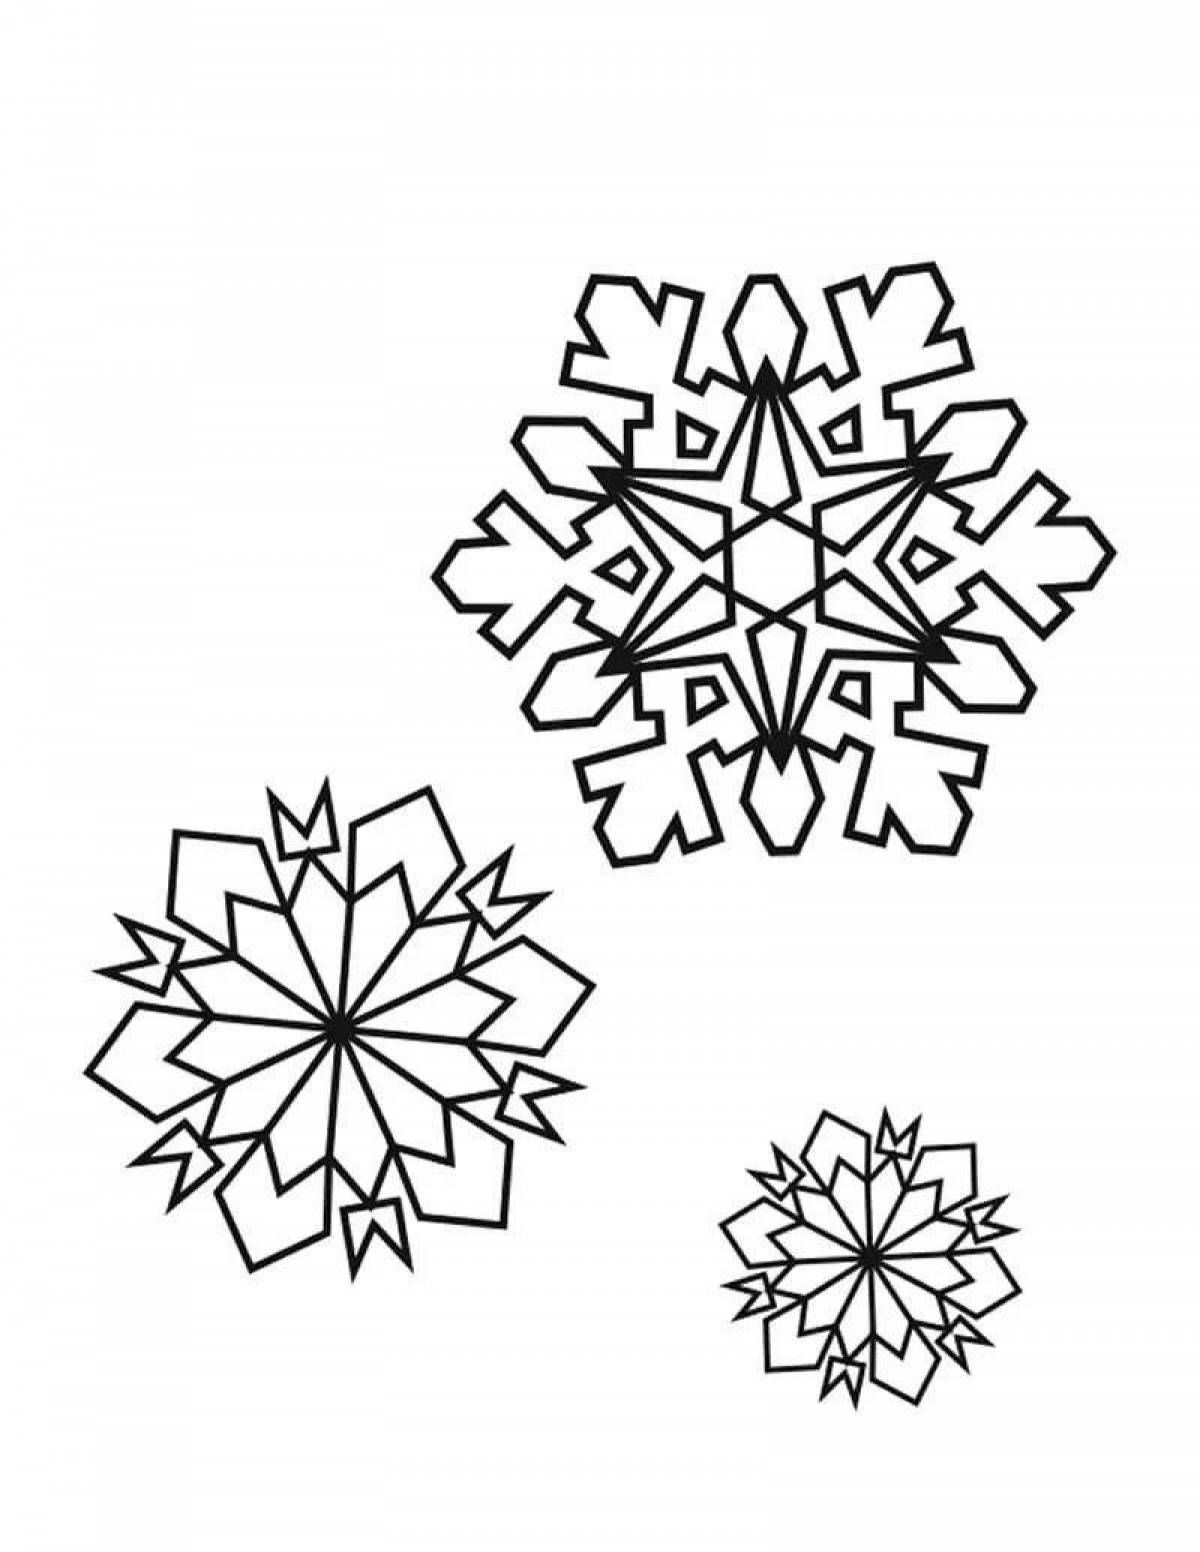 Flawless Snowflake coloring page